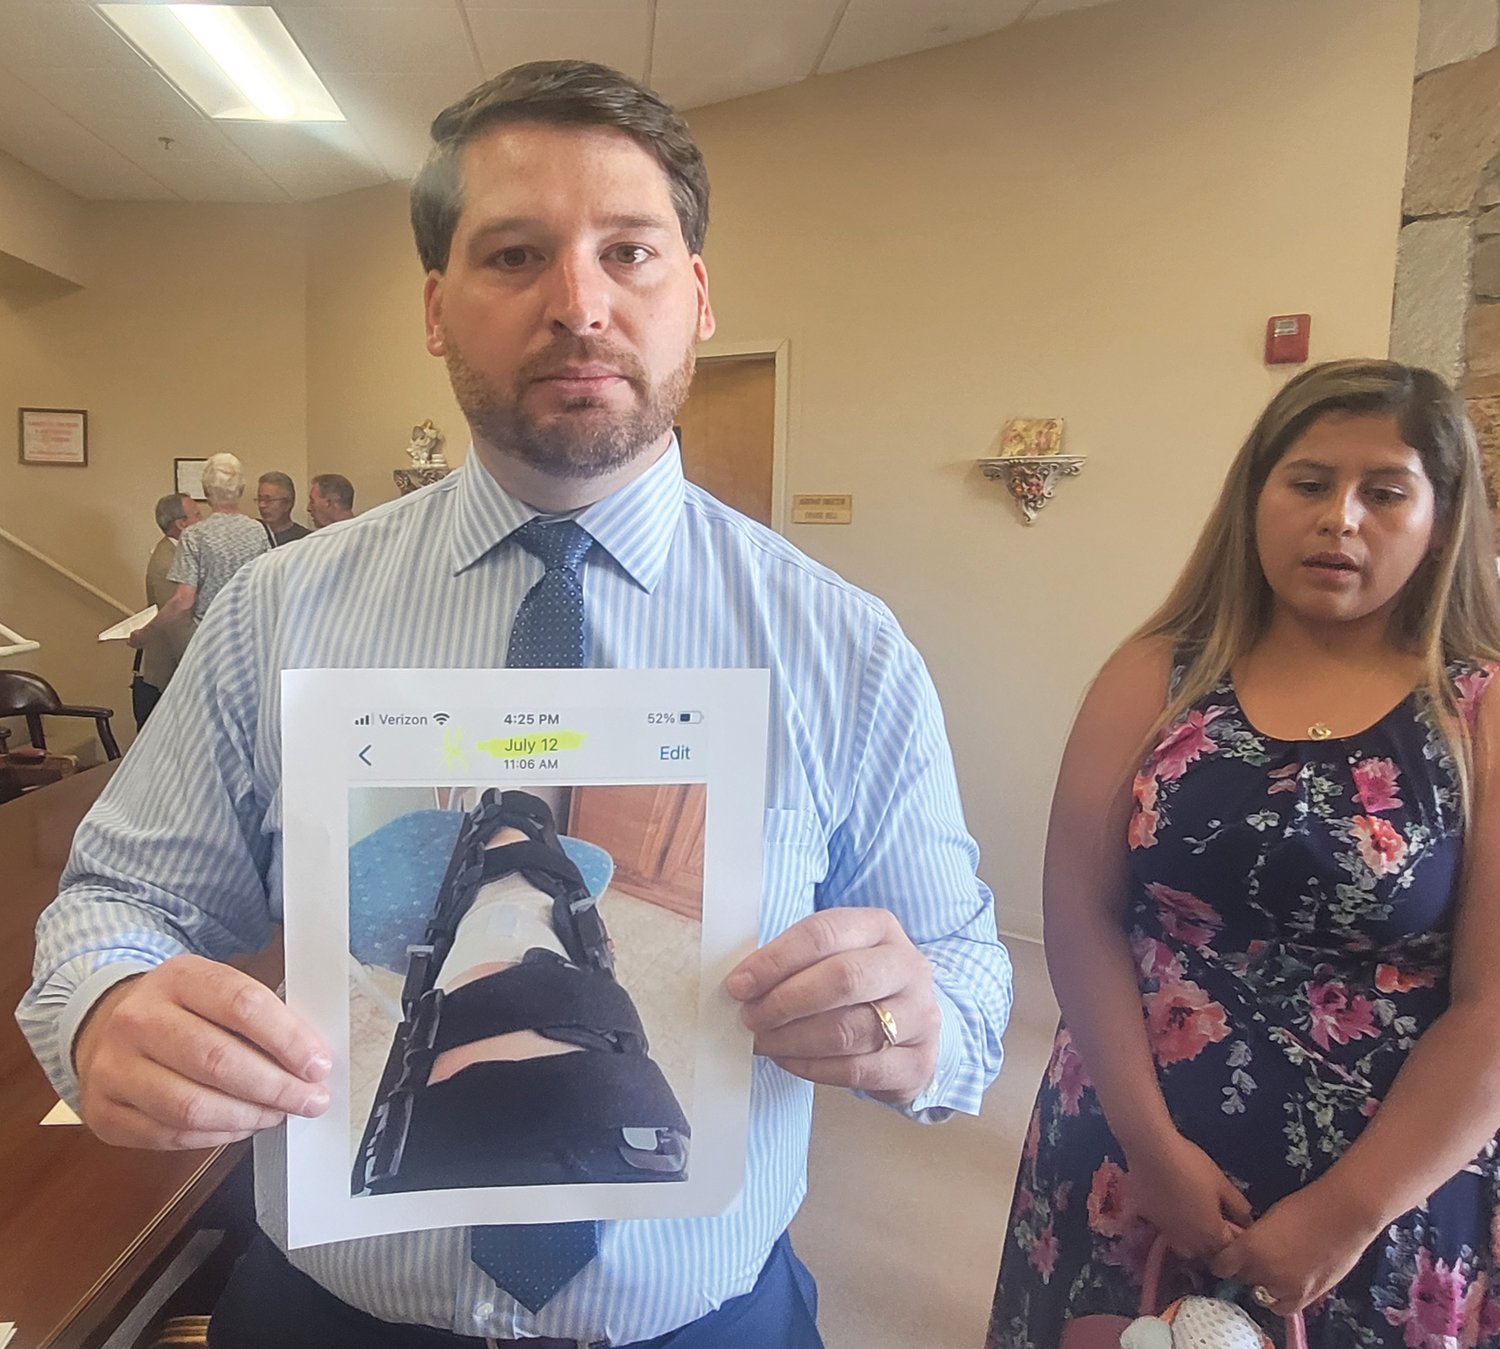 AILING MOM: Dennis Cardillo Jr. holds a photograph of what he says is his mother’s post-operative injury dated July 12. The candidate for state representative in District 42 has been accused of living outside the district. He insists he was merely taking care of his mother in Cranston while she recuperated.